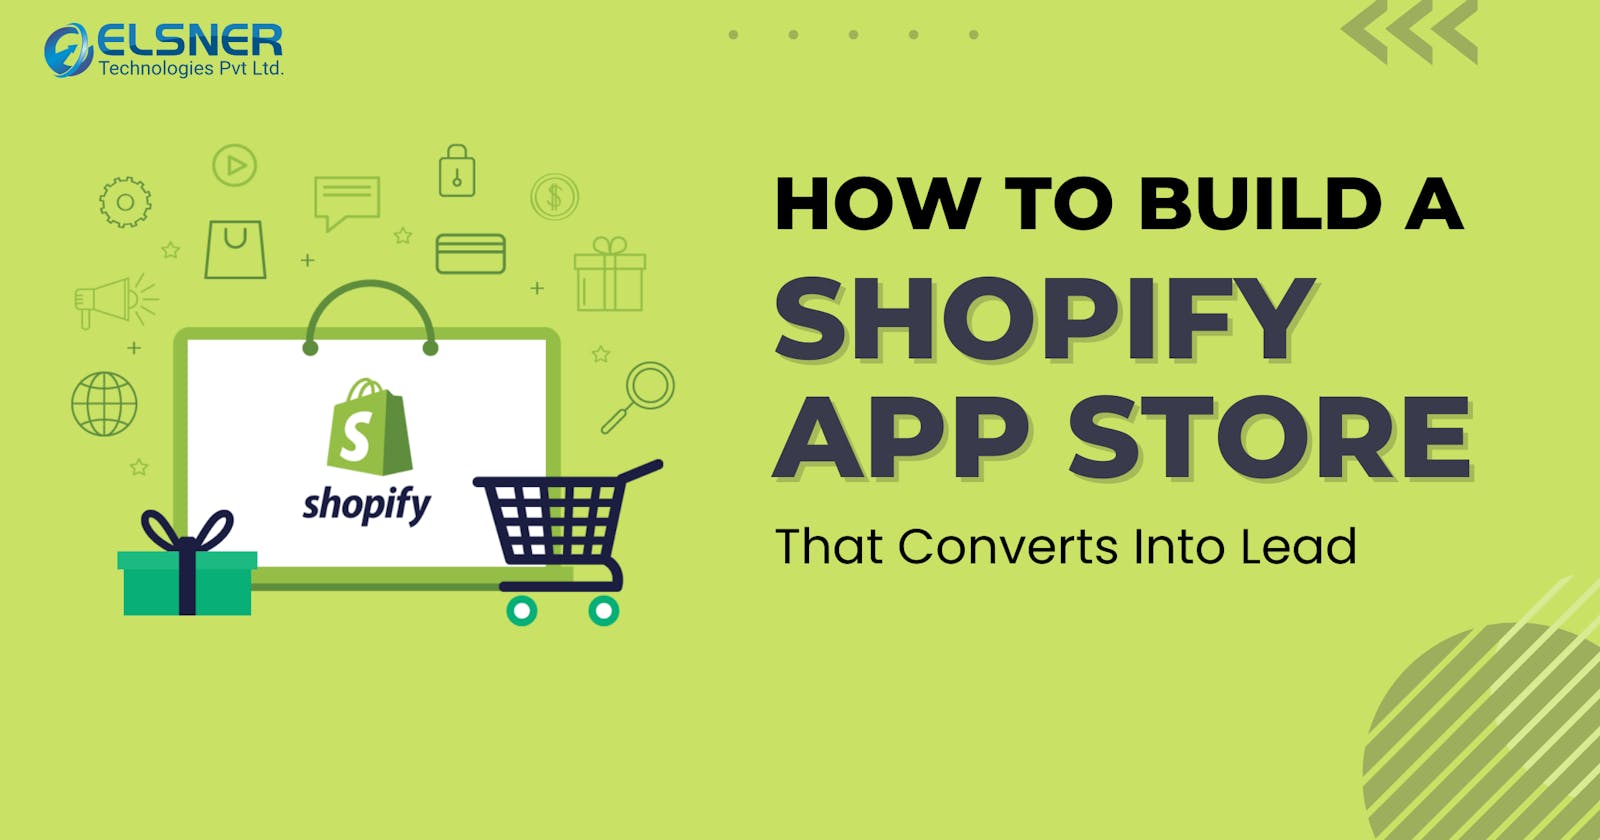 How To Build A Shopify App Store That Converts Into Lead